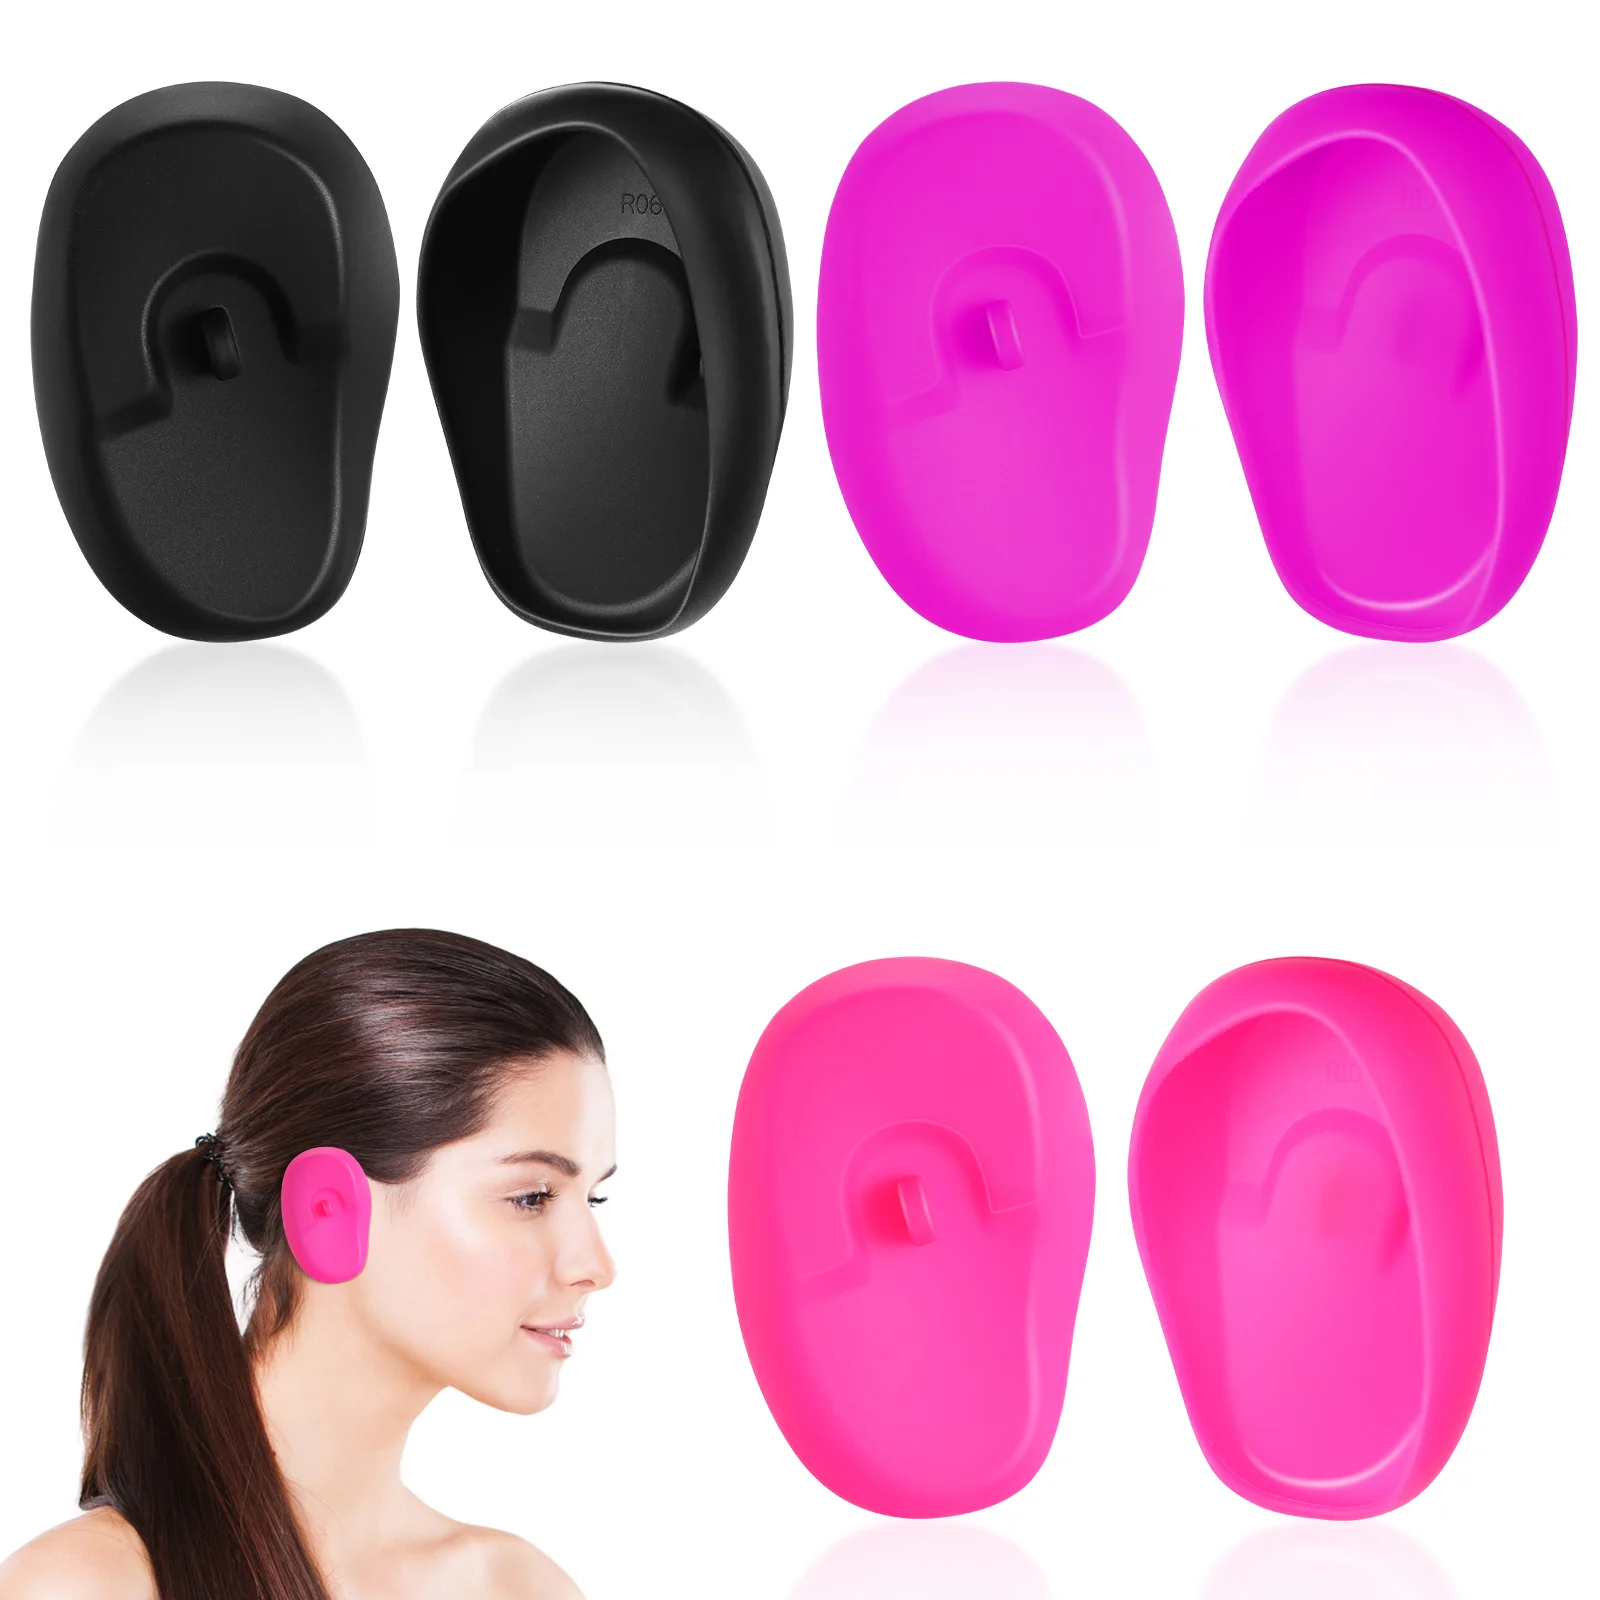 

3 Pairs Hair Dye Earmuff Shower Caps Earhook Covers Silicone Salon Supplies Barber Protectors